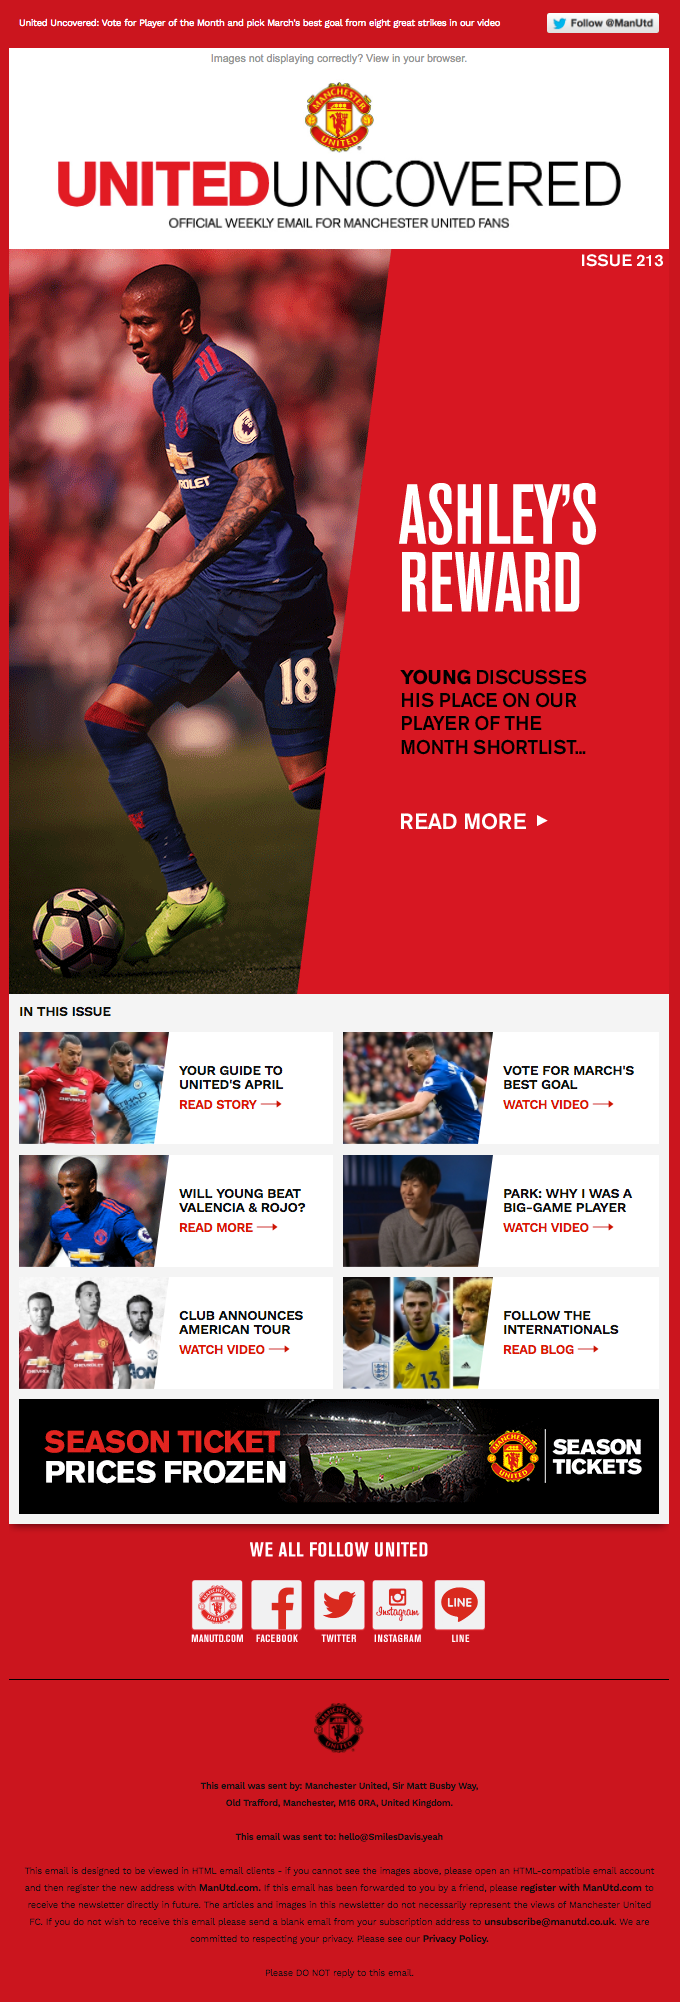 Vote for United’s Player and Goal of the Month